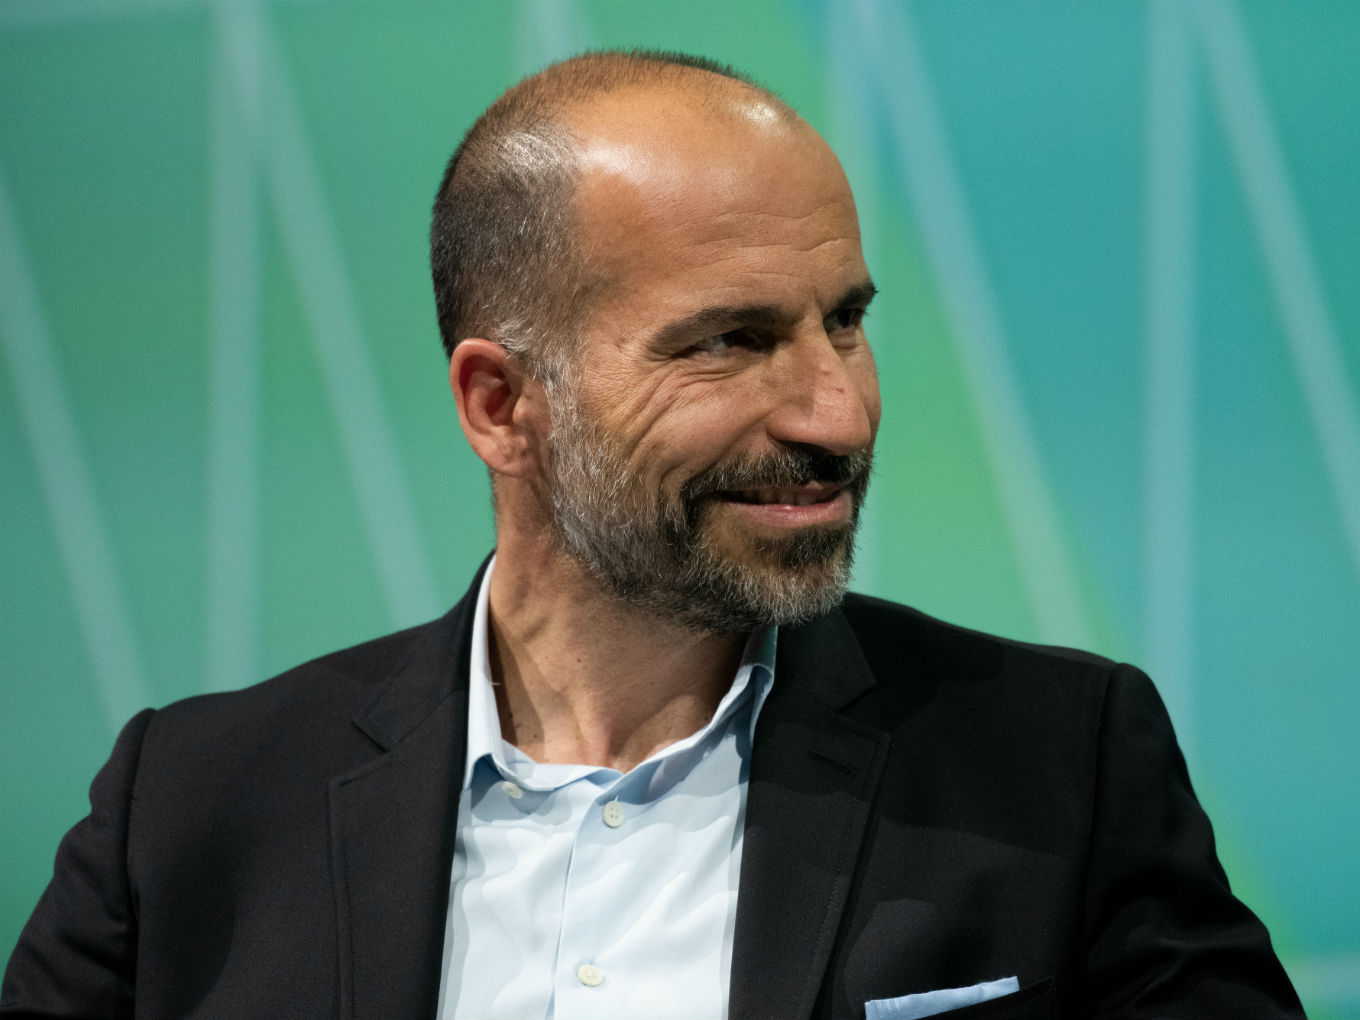 Uber Is The Largest Investment By SoftBank Globally: Dara Khosrowshahi